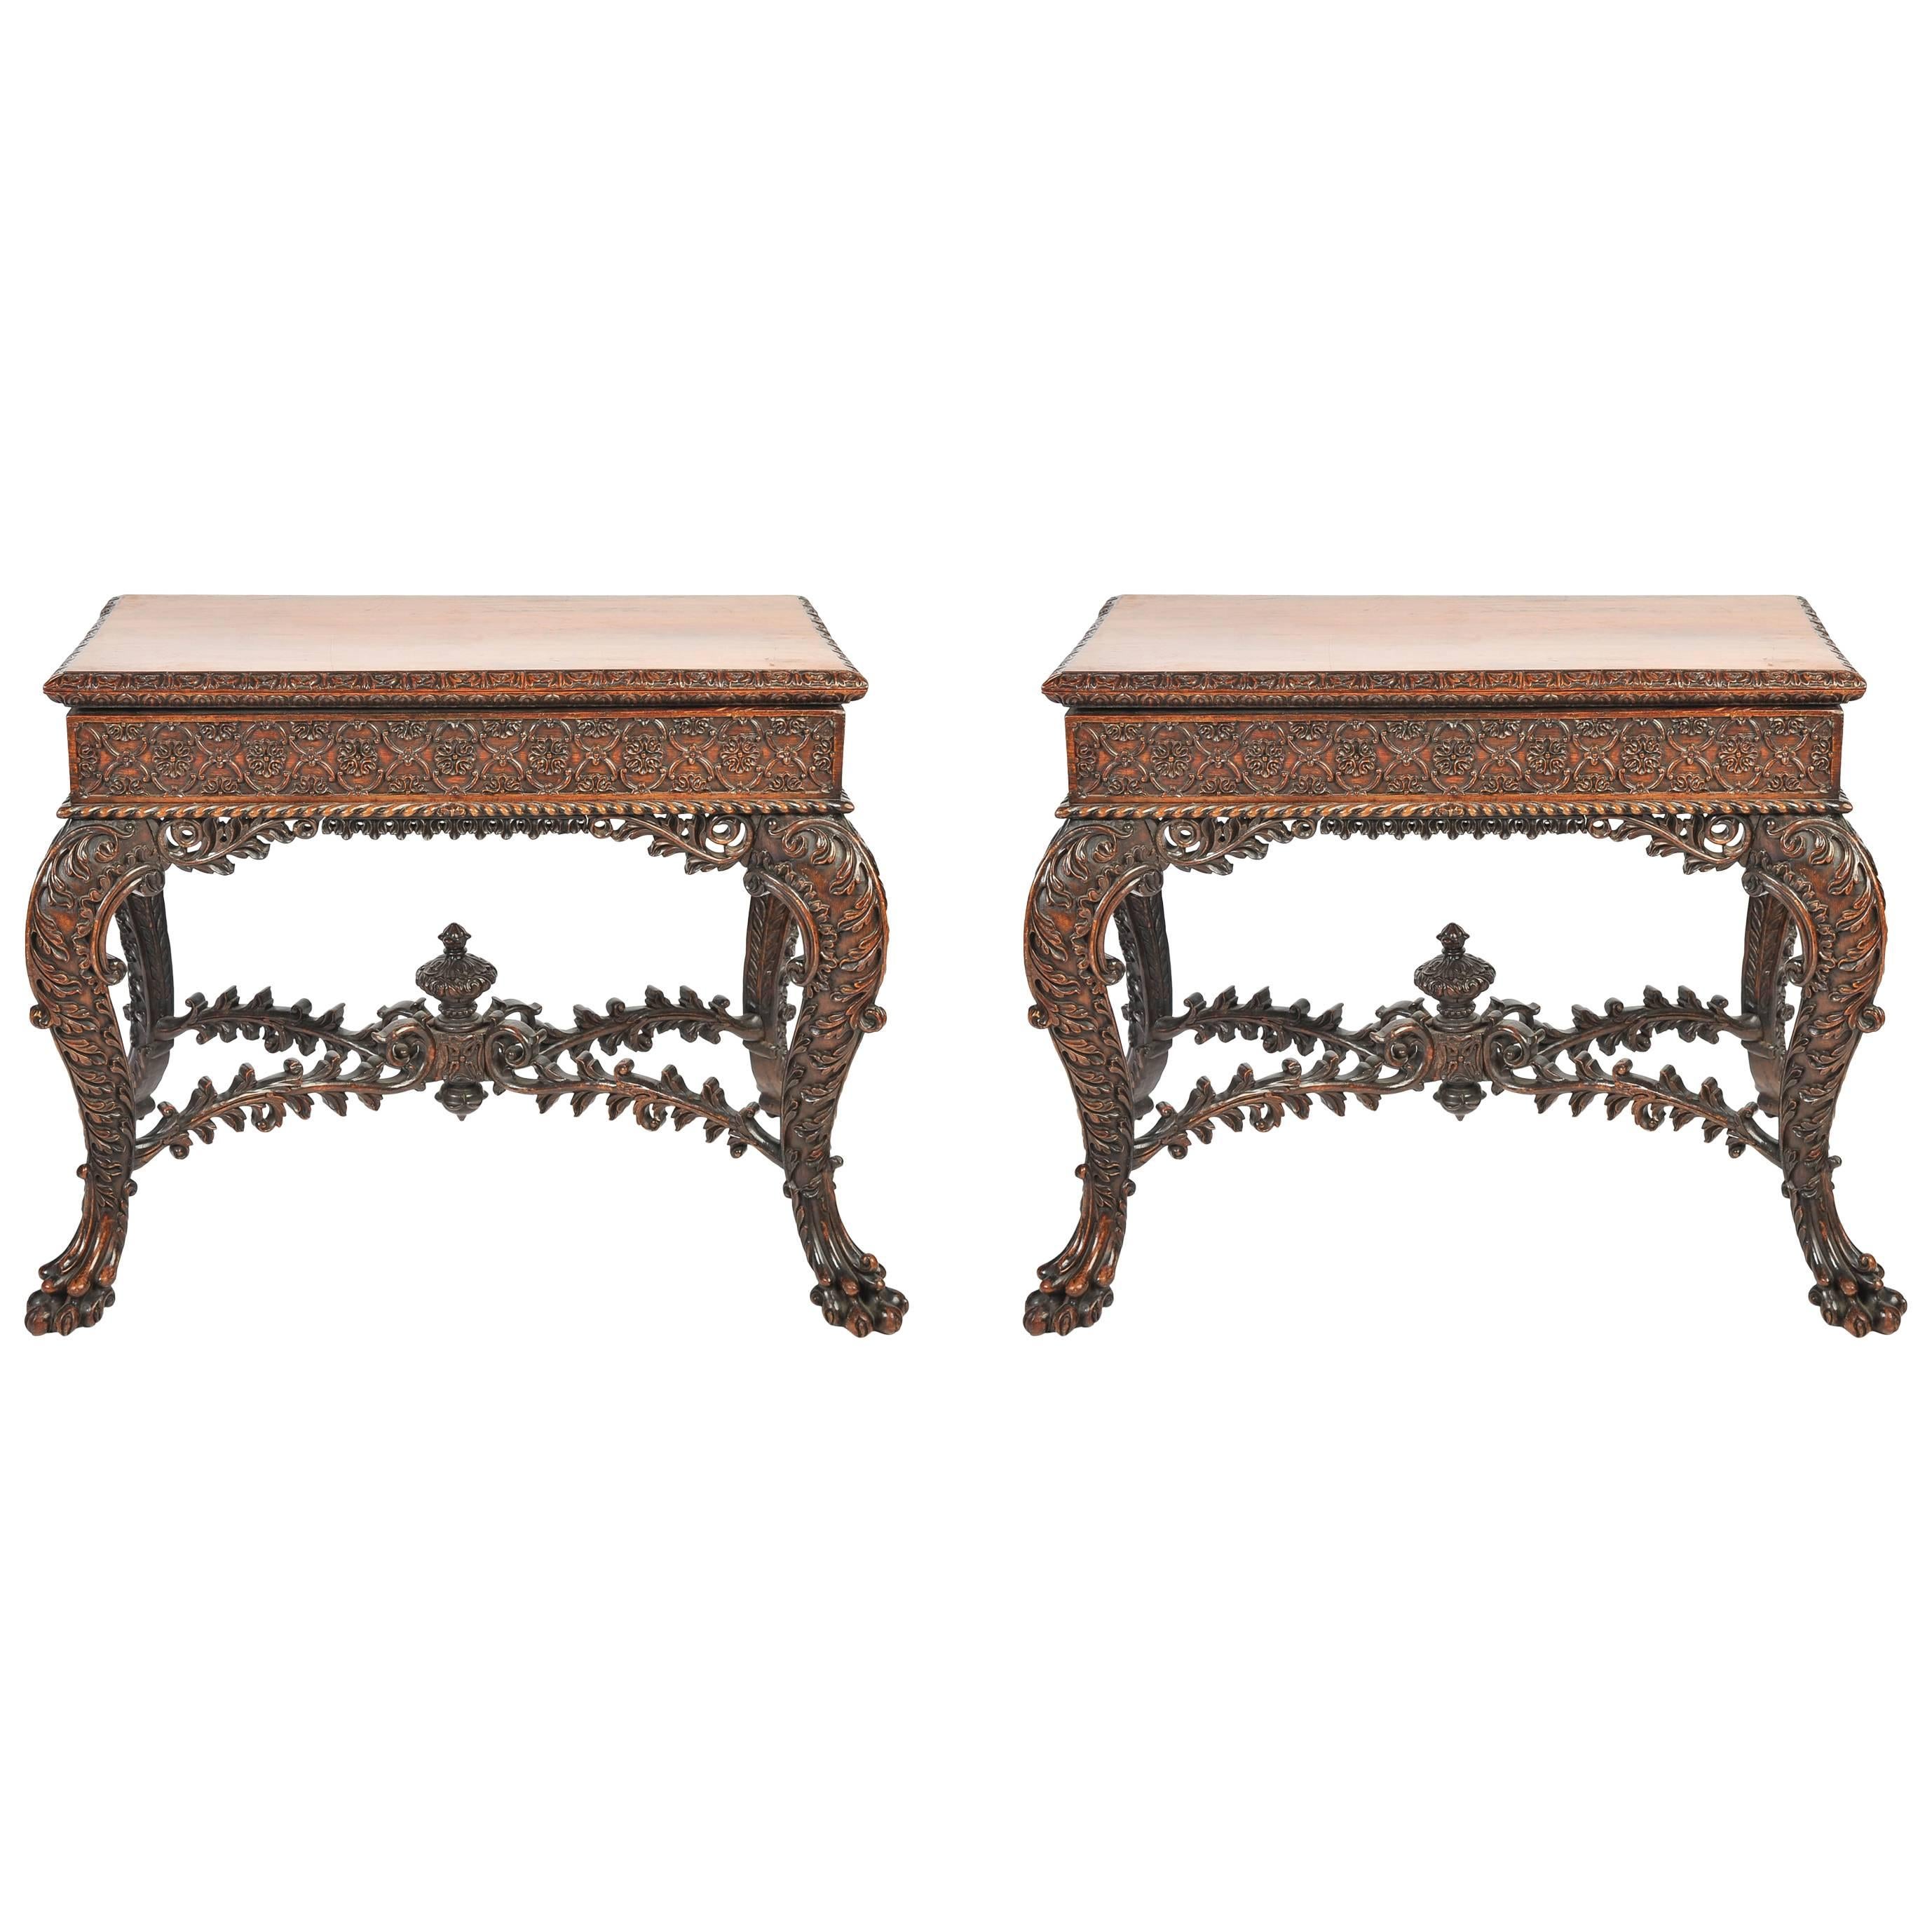 Pair of Anglo-Indian Card Tables, 19th Century